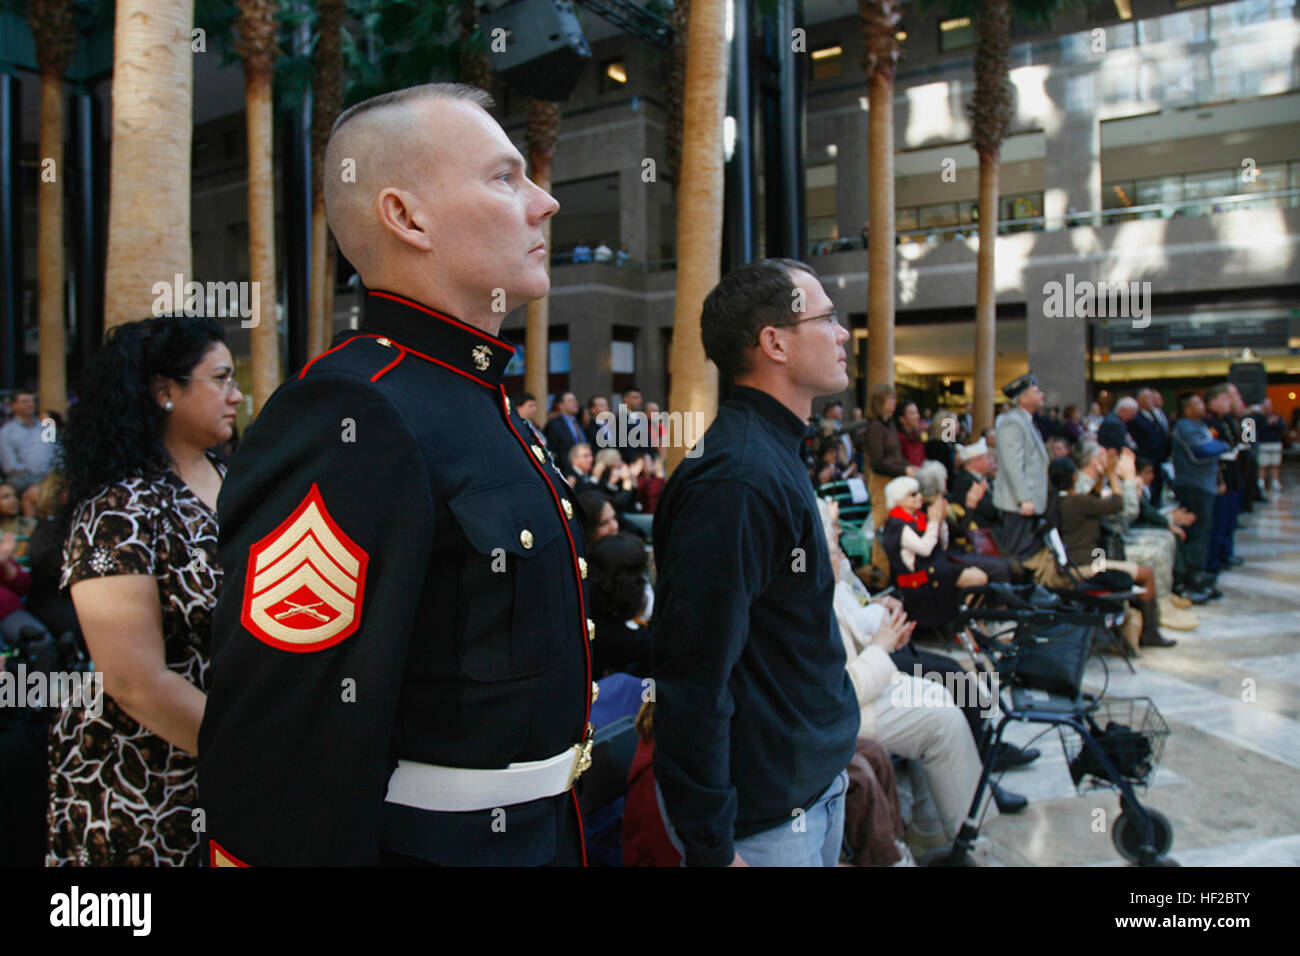 Retired Marine Staff Sgt. David Karnes stands at attention during the playing of the Marine's Hymn during a Quantico Marine Corps Band concert Nov. 10, 2008 at Battery Park in New York. Karnes was recognized for his rescue work during the attack on the World Trade Center, where he saved two law enforcement officers.  (Official Marine Corps photo by Lance Cpl. Brian Lewis.) 22nd Marine Expeditionary Unit, USS Bataan Members Attend Quantico Marine Band Performance DVIDS130835 Stock Photo